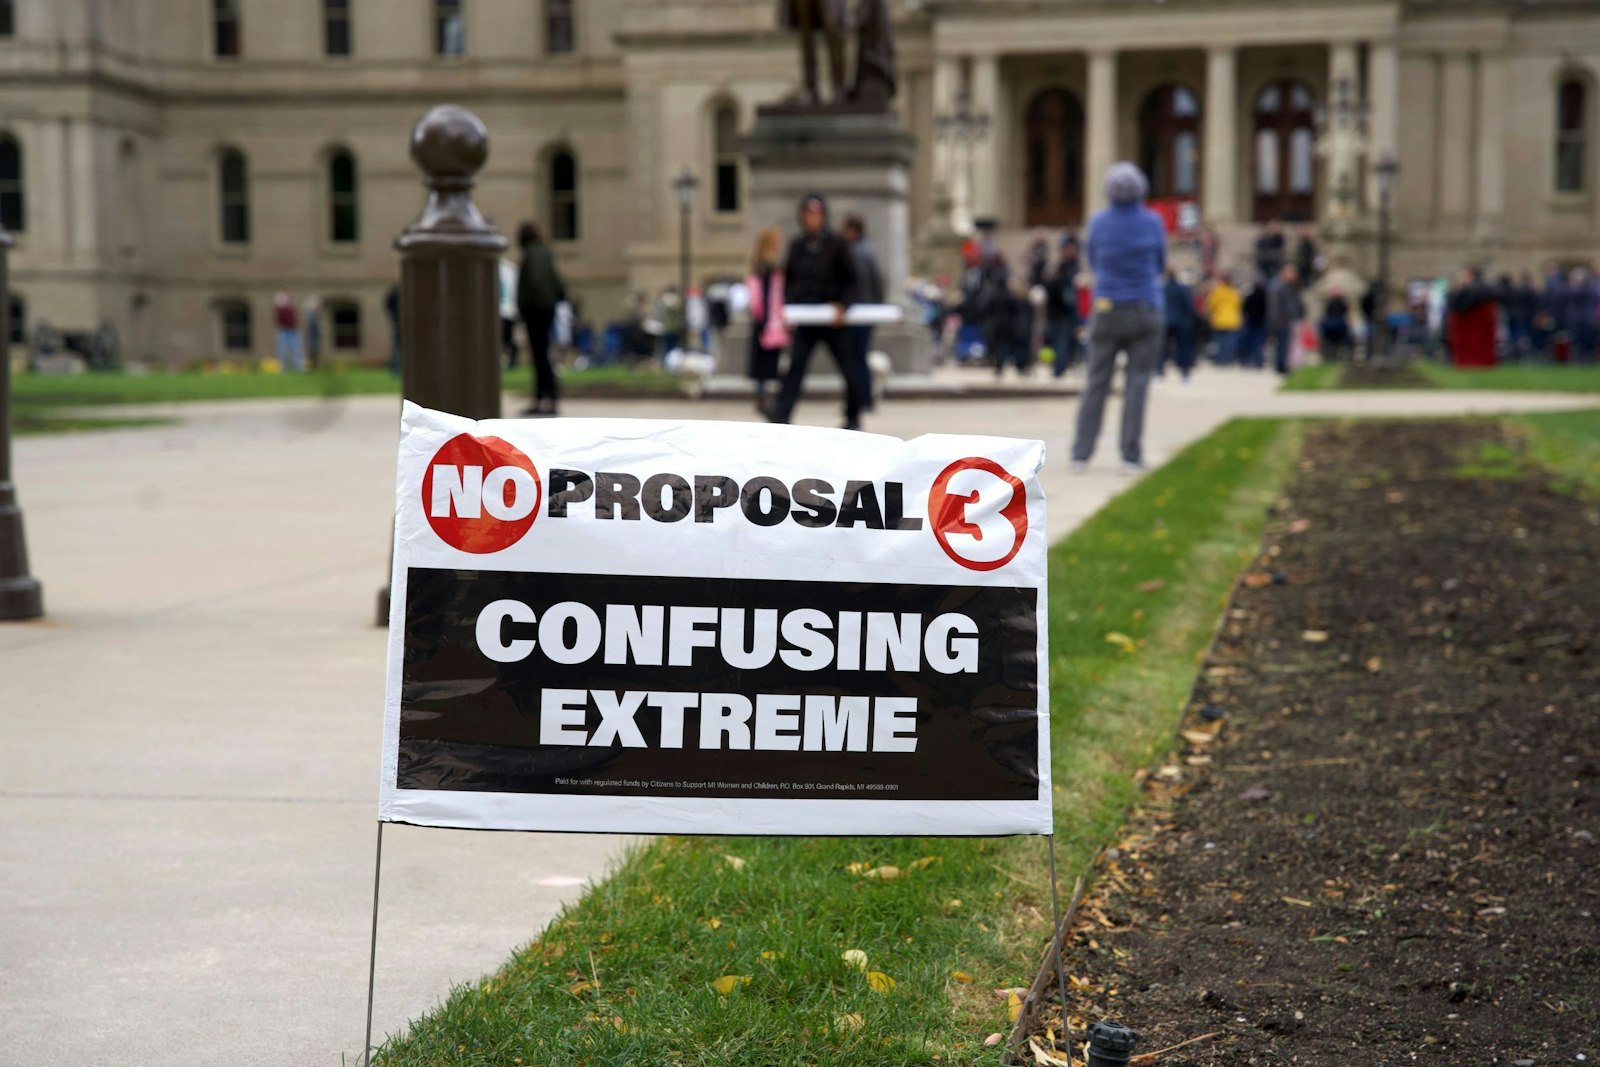 A sign opposing Proposal 3 is pictured outside the state capitol building in Lansing on Oct. 15. As a constitutional amendment, Proposal 3 would create a "super right" to abortion in Michigan that would supersede other rights, including those of parents to be involved in their child's medical decisions. (Gabriella Patti | Detroit Catholic)